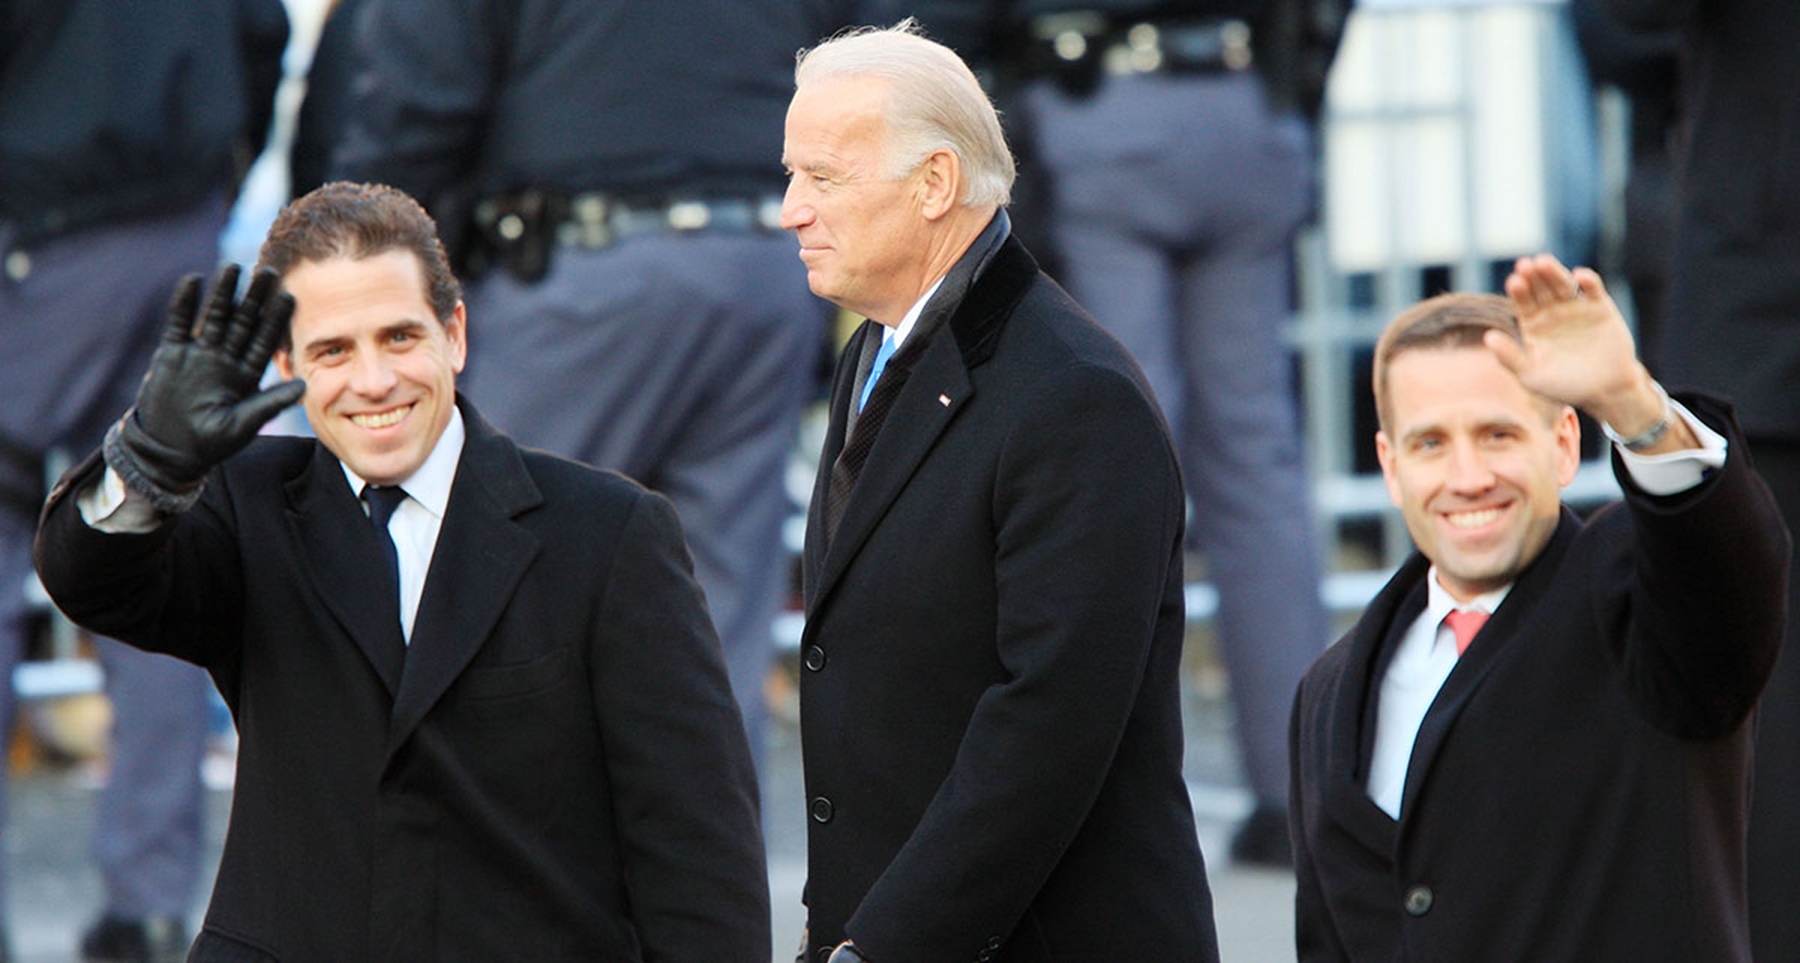 Former U.S. Vice President Joe Biden’s son is in a relationship with his brother’s widow